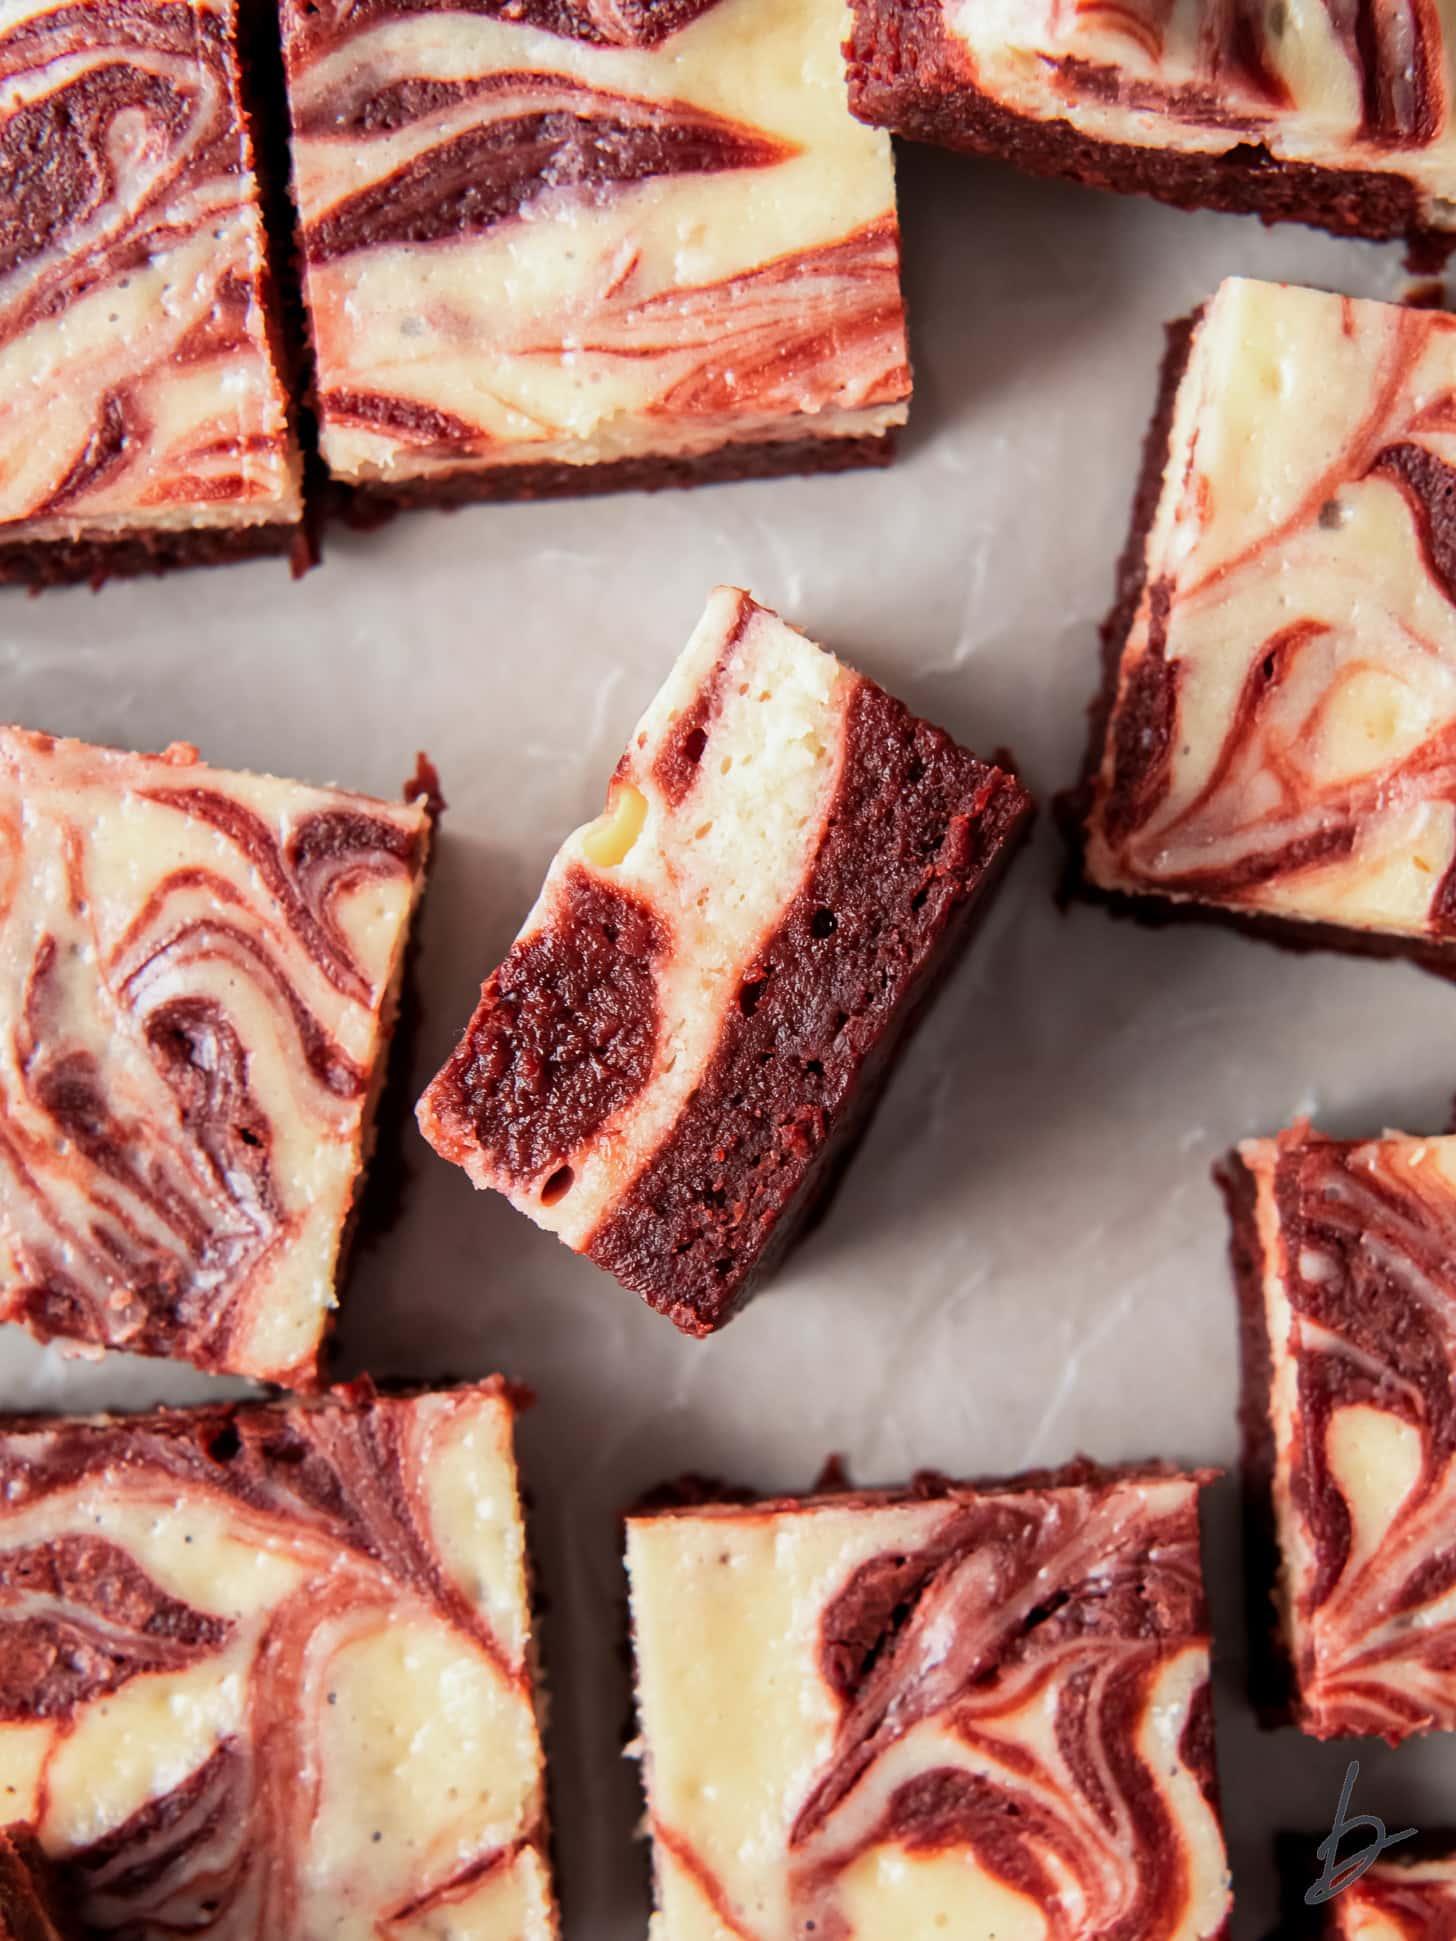 red velvet cheesecake brownie on its side showing layers next to more brownies with marbled tops.